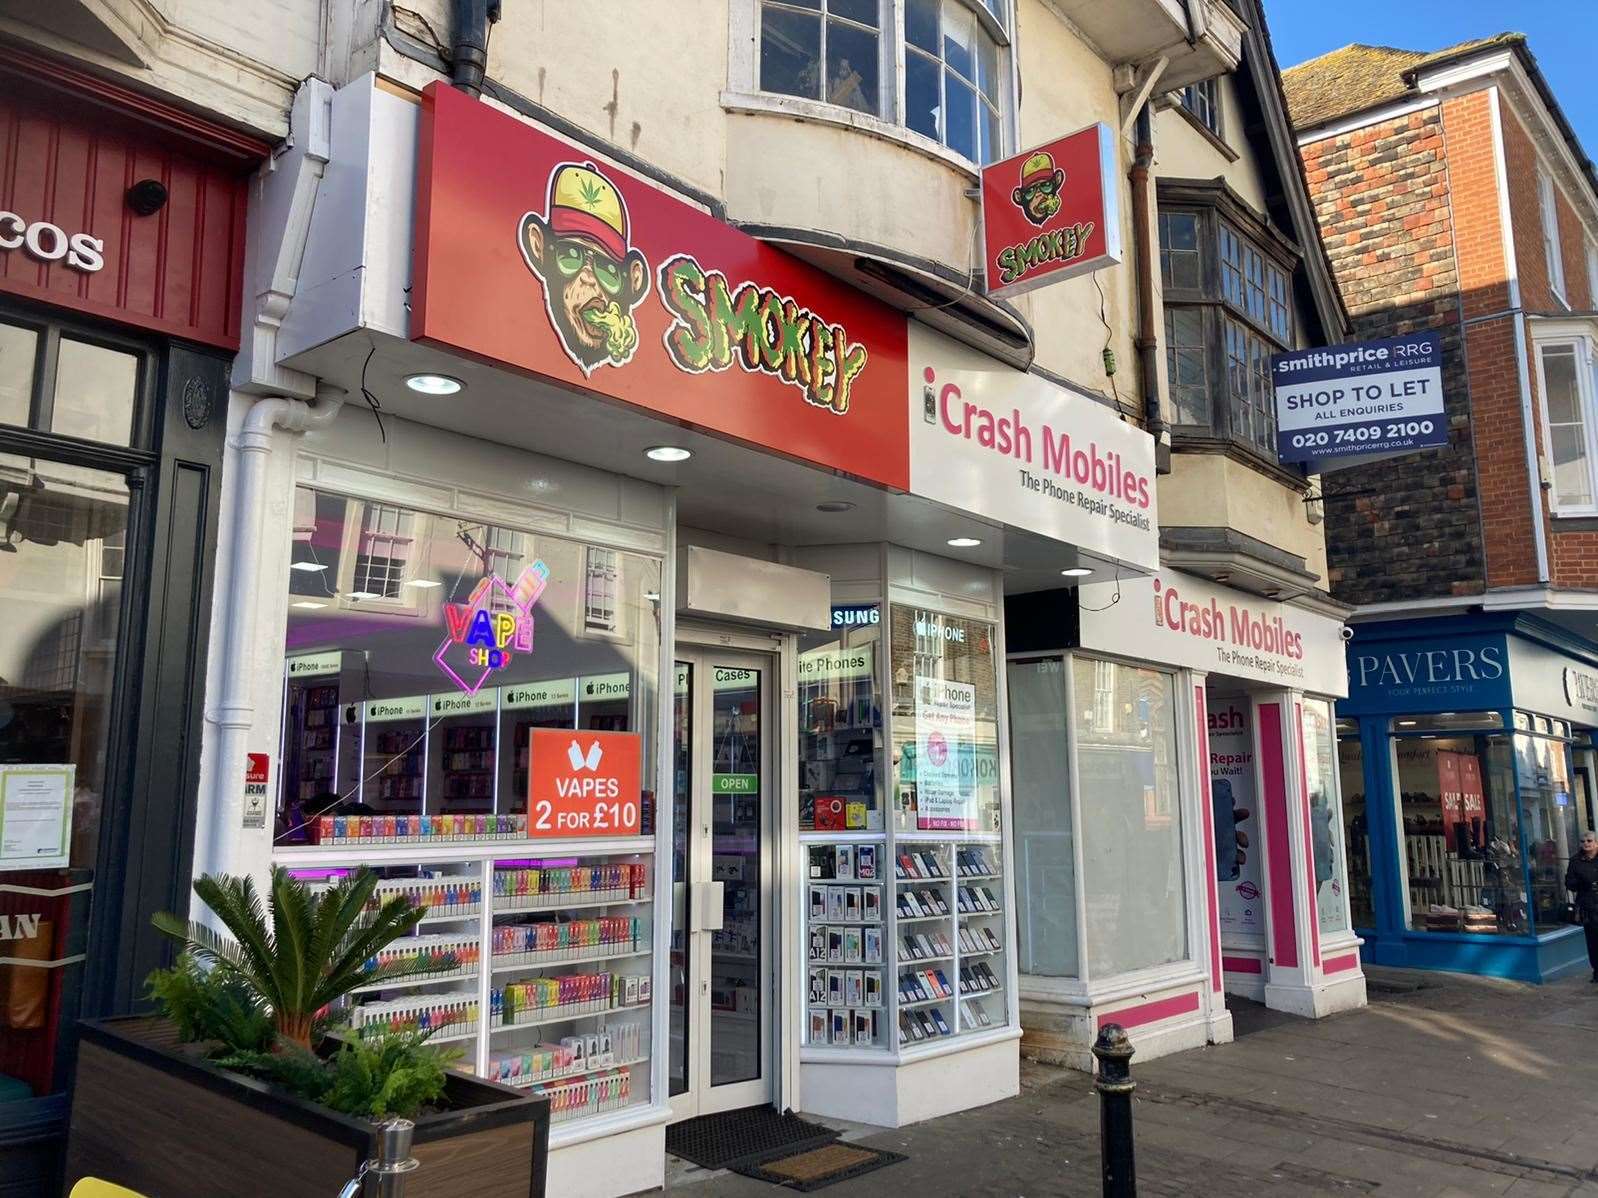 The iCrash Mobiles shop in Canterbury features a picture of a smoking monkey